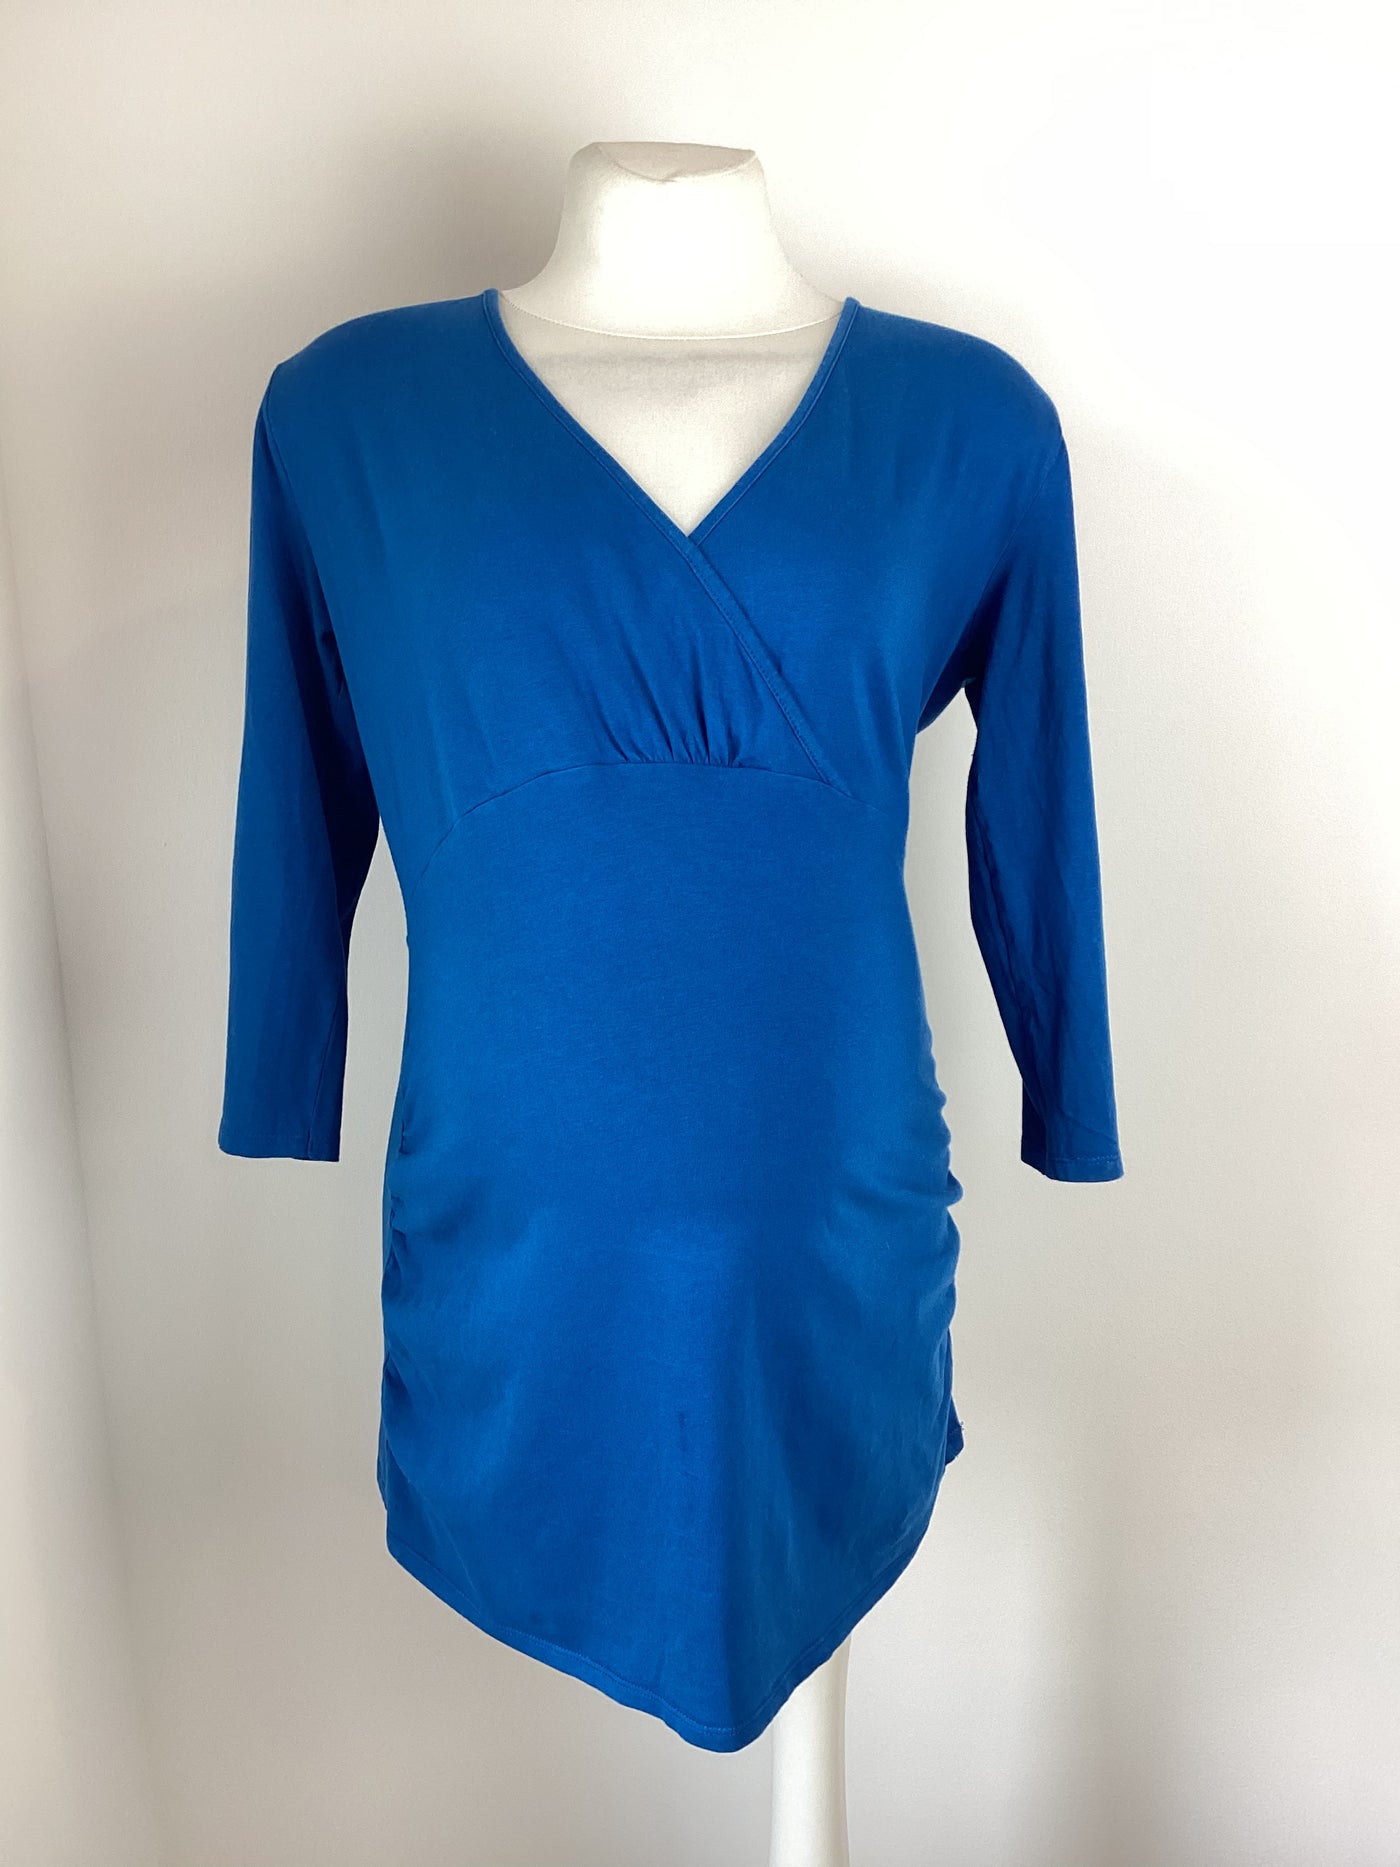 Dorothy Perkins Maternity teal 3/4 sleeve crossover front nursing top - Size 12